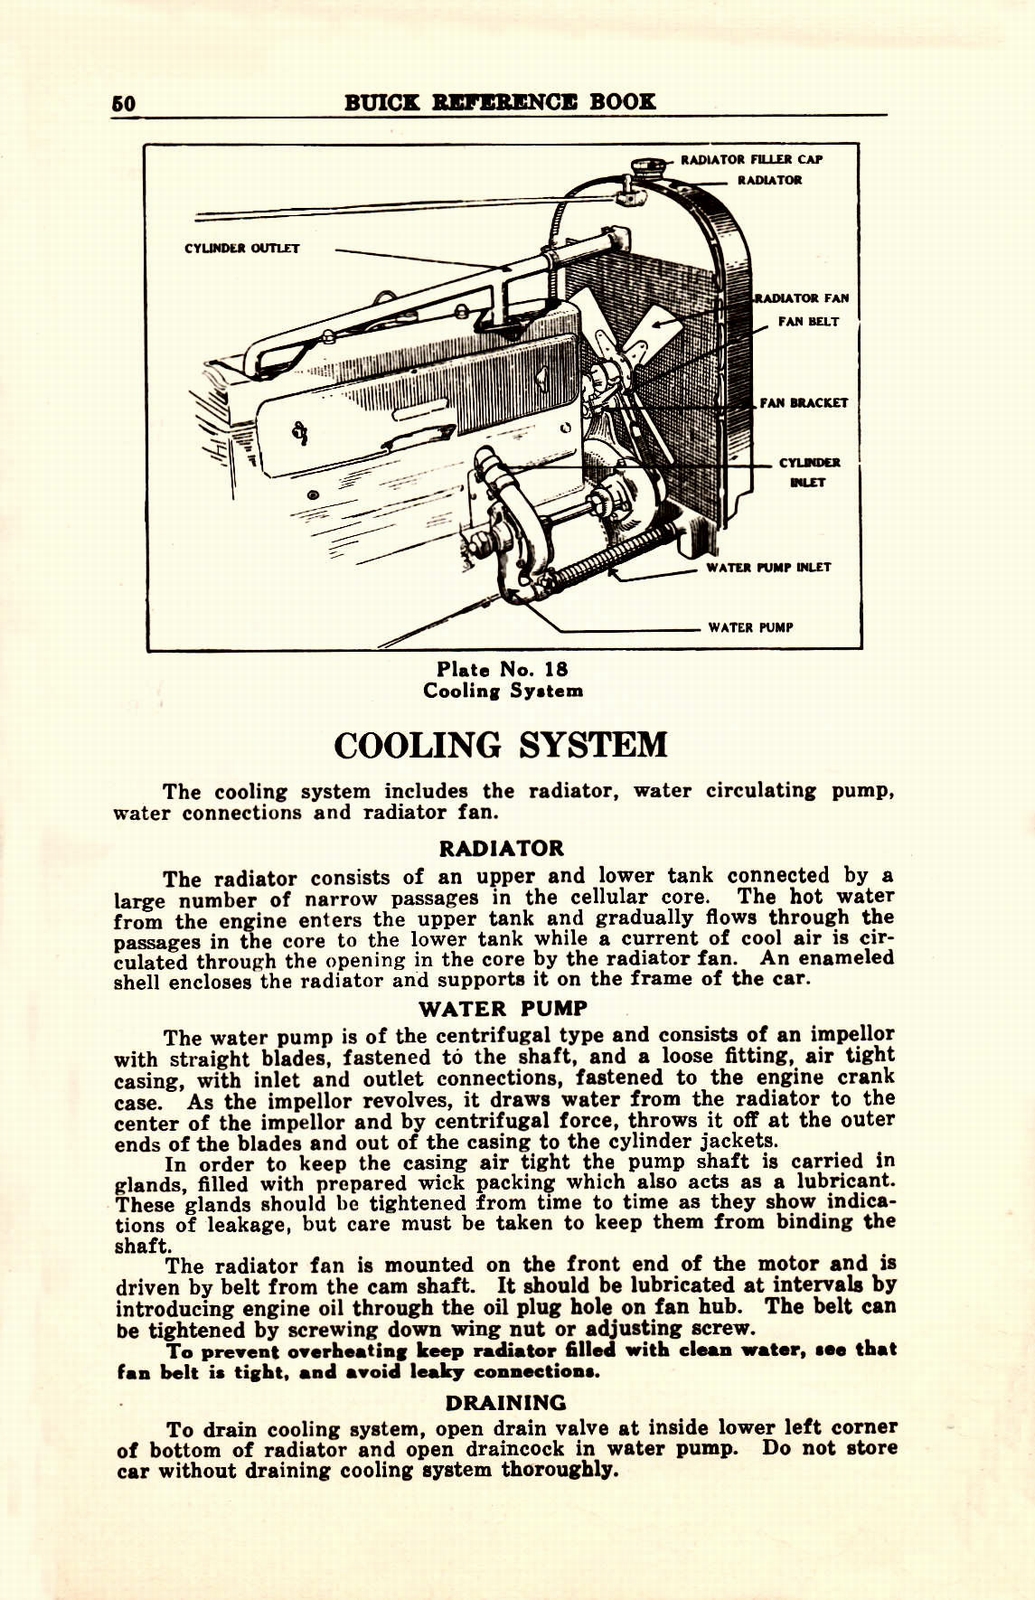 n_1923 Buick 6 cyl Reference Book-50.jpg